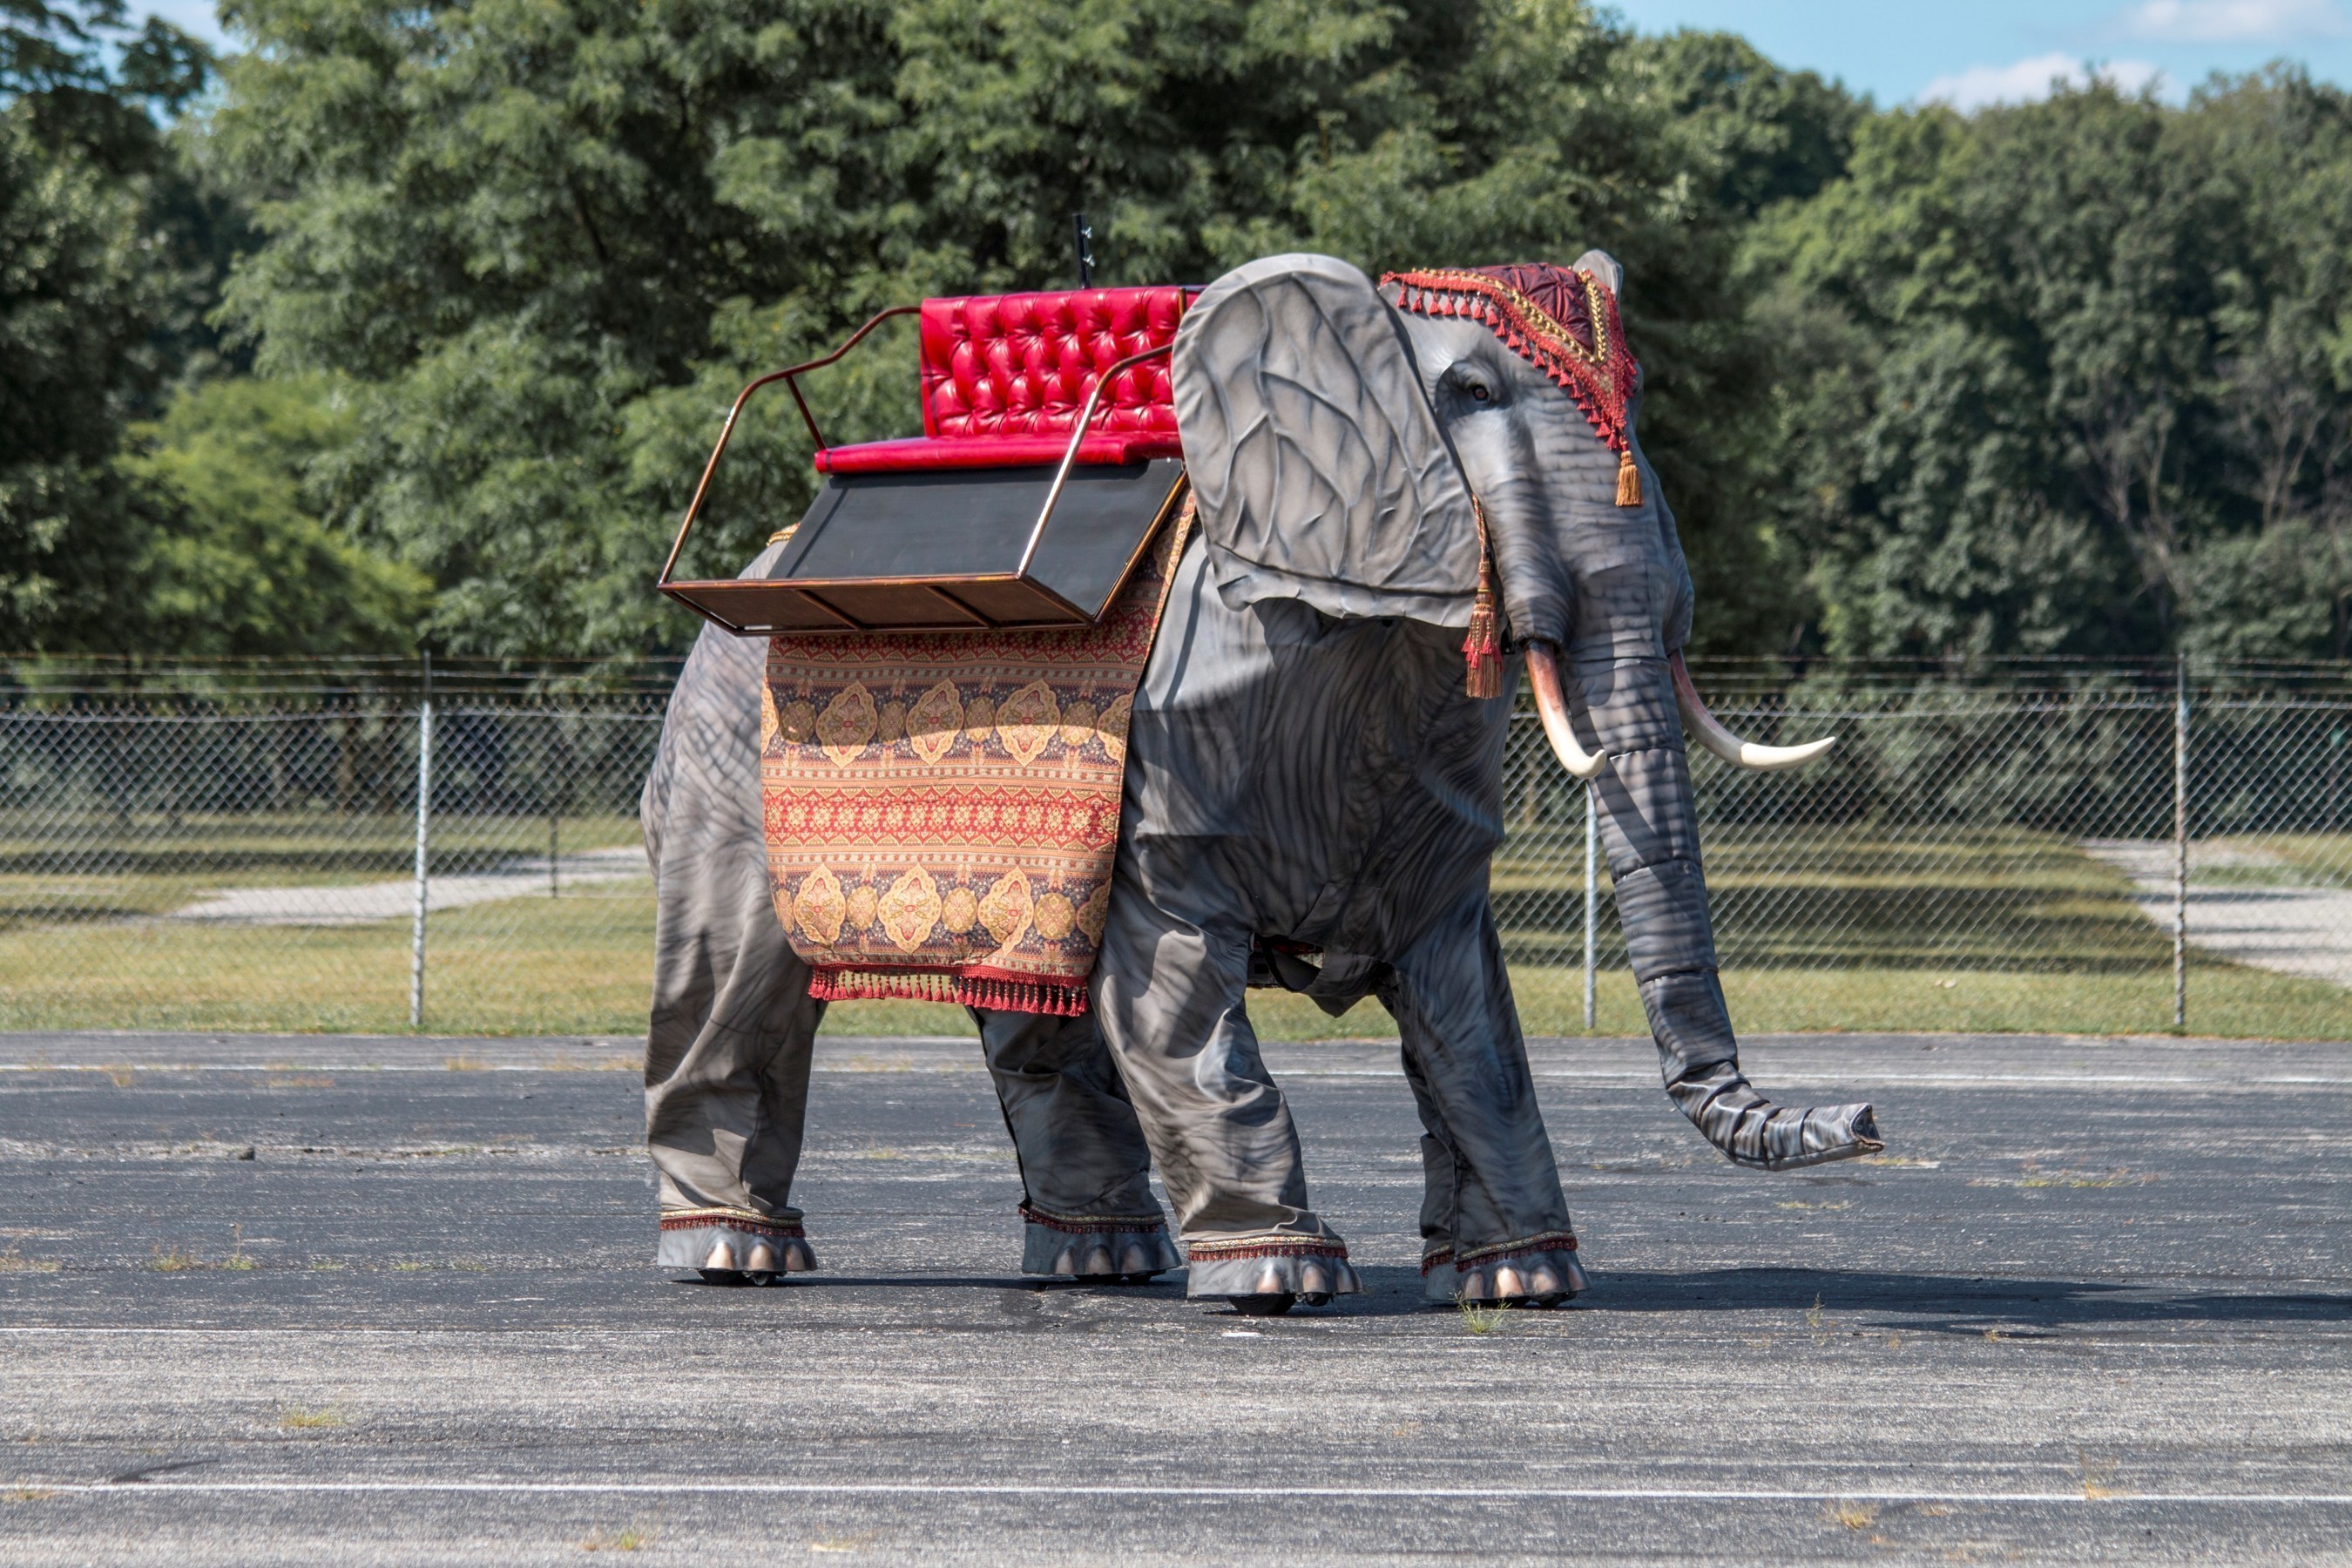 Wendell, the life-size mechanical elephant, is up for sale this weekend at Auctions America's Auburn Fall Collector Car Weekend. A Labor Day Weekend tradition spanning 45+ years, the event - held at Indiana's historic Auburn Auction Park - brings thousands of enthusiasts to the Classic Car Capital of America. Joining a roster of more than 900 collector cars, Wendell is set to make a big splash at this weekend's sale where he is expected to fetch more than $250,000. A portion of proceeds from his sale will benefit Kate's Kart, a Northeast Indiana not-for-profit organization. More: www.auctionsamerica.com, www.kateskart.org.